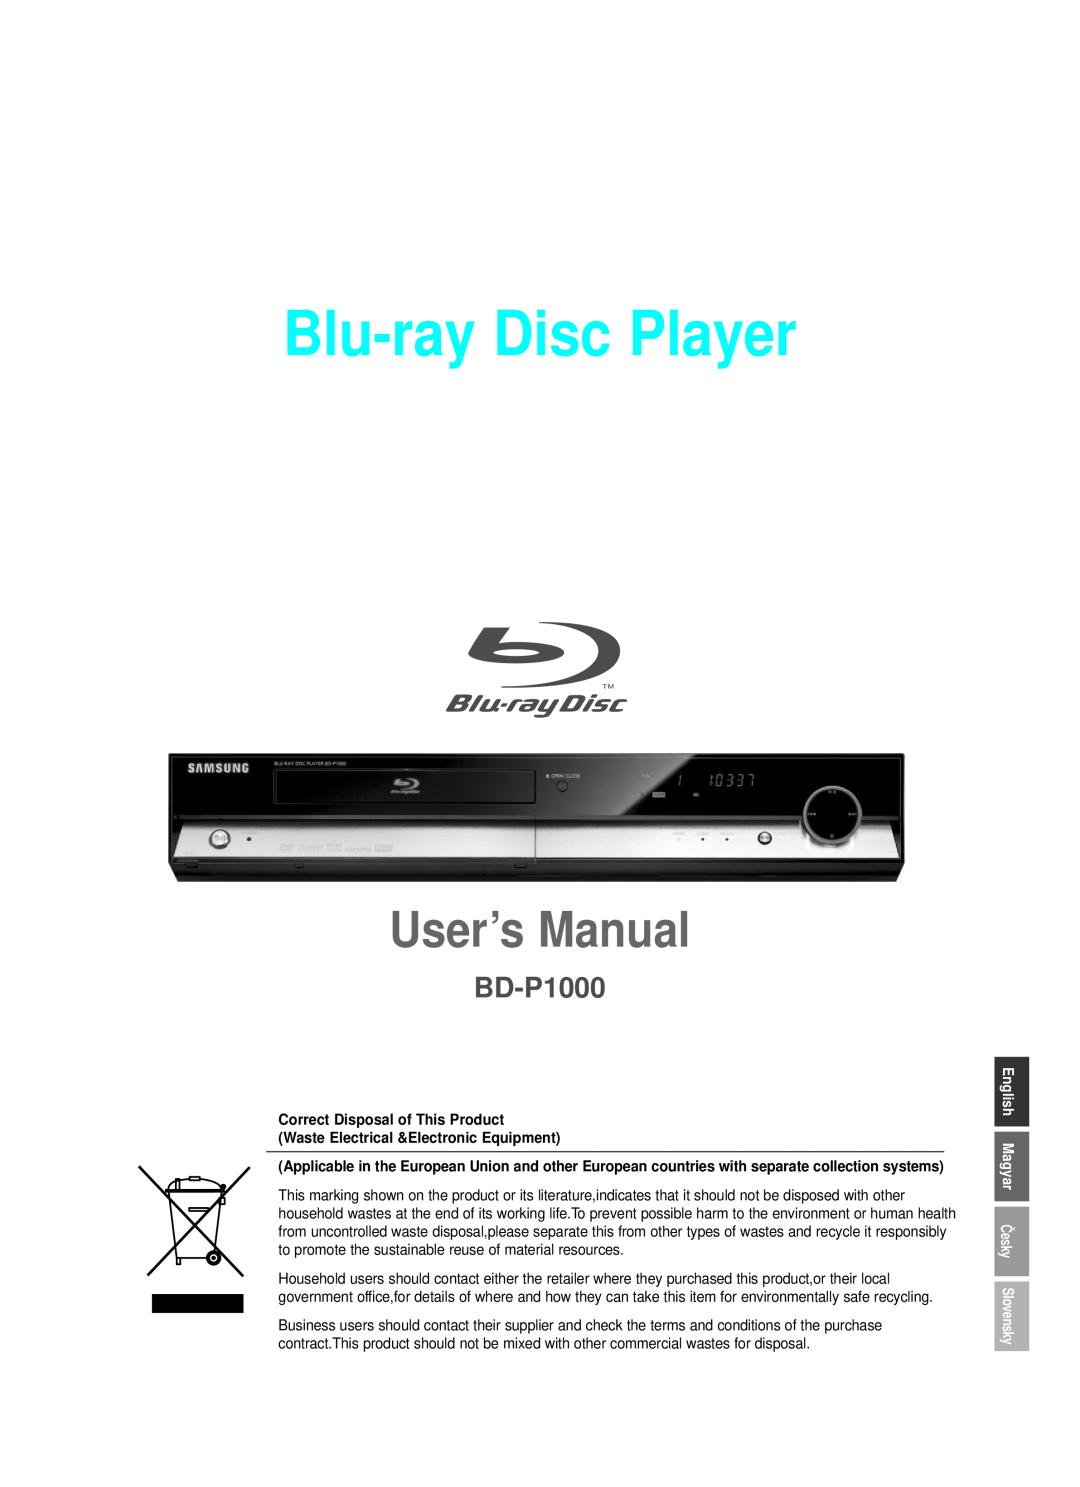 Samsung BD-P1000/XEN manual Correct Disposal of This Product, Waste Electrical &Electronic Equipment, Blu-ray Disc Player 